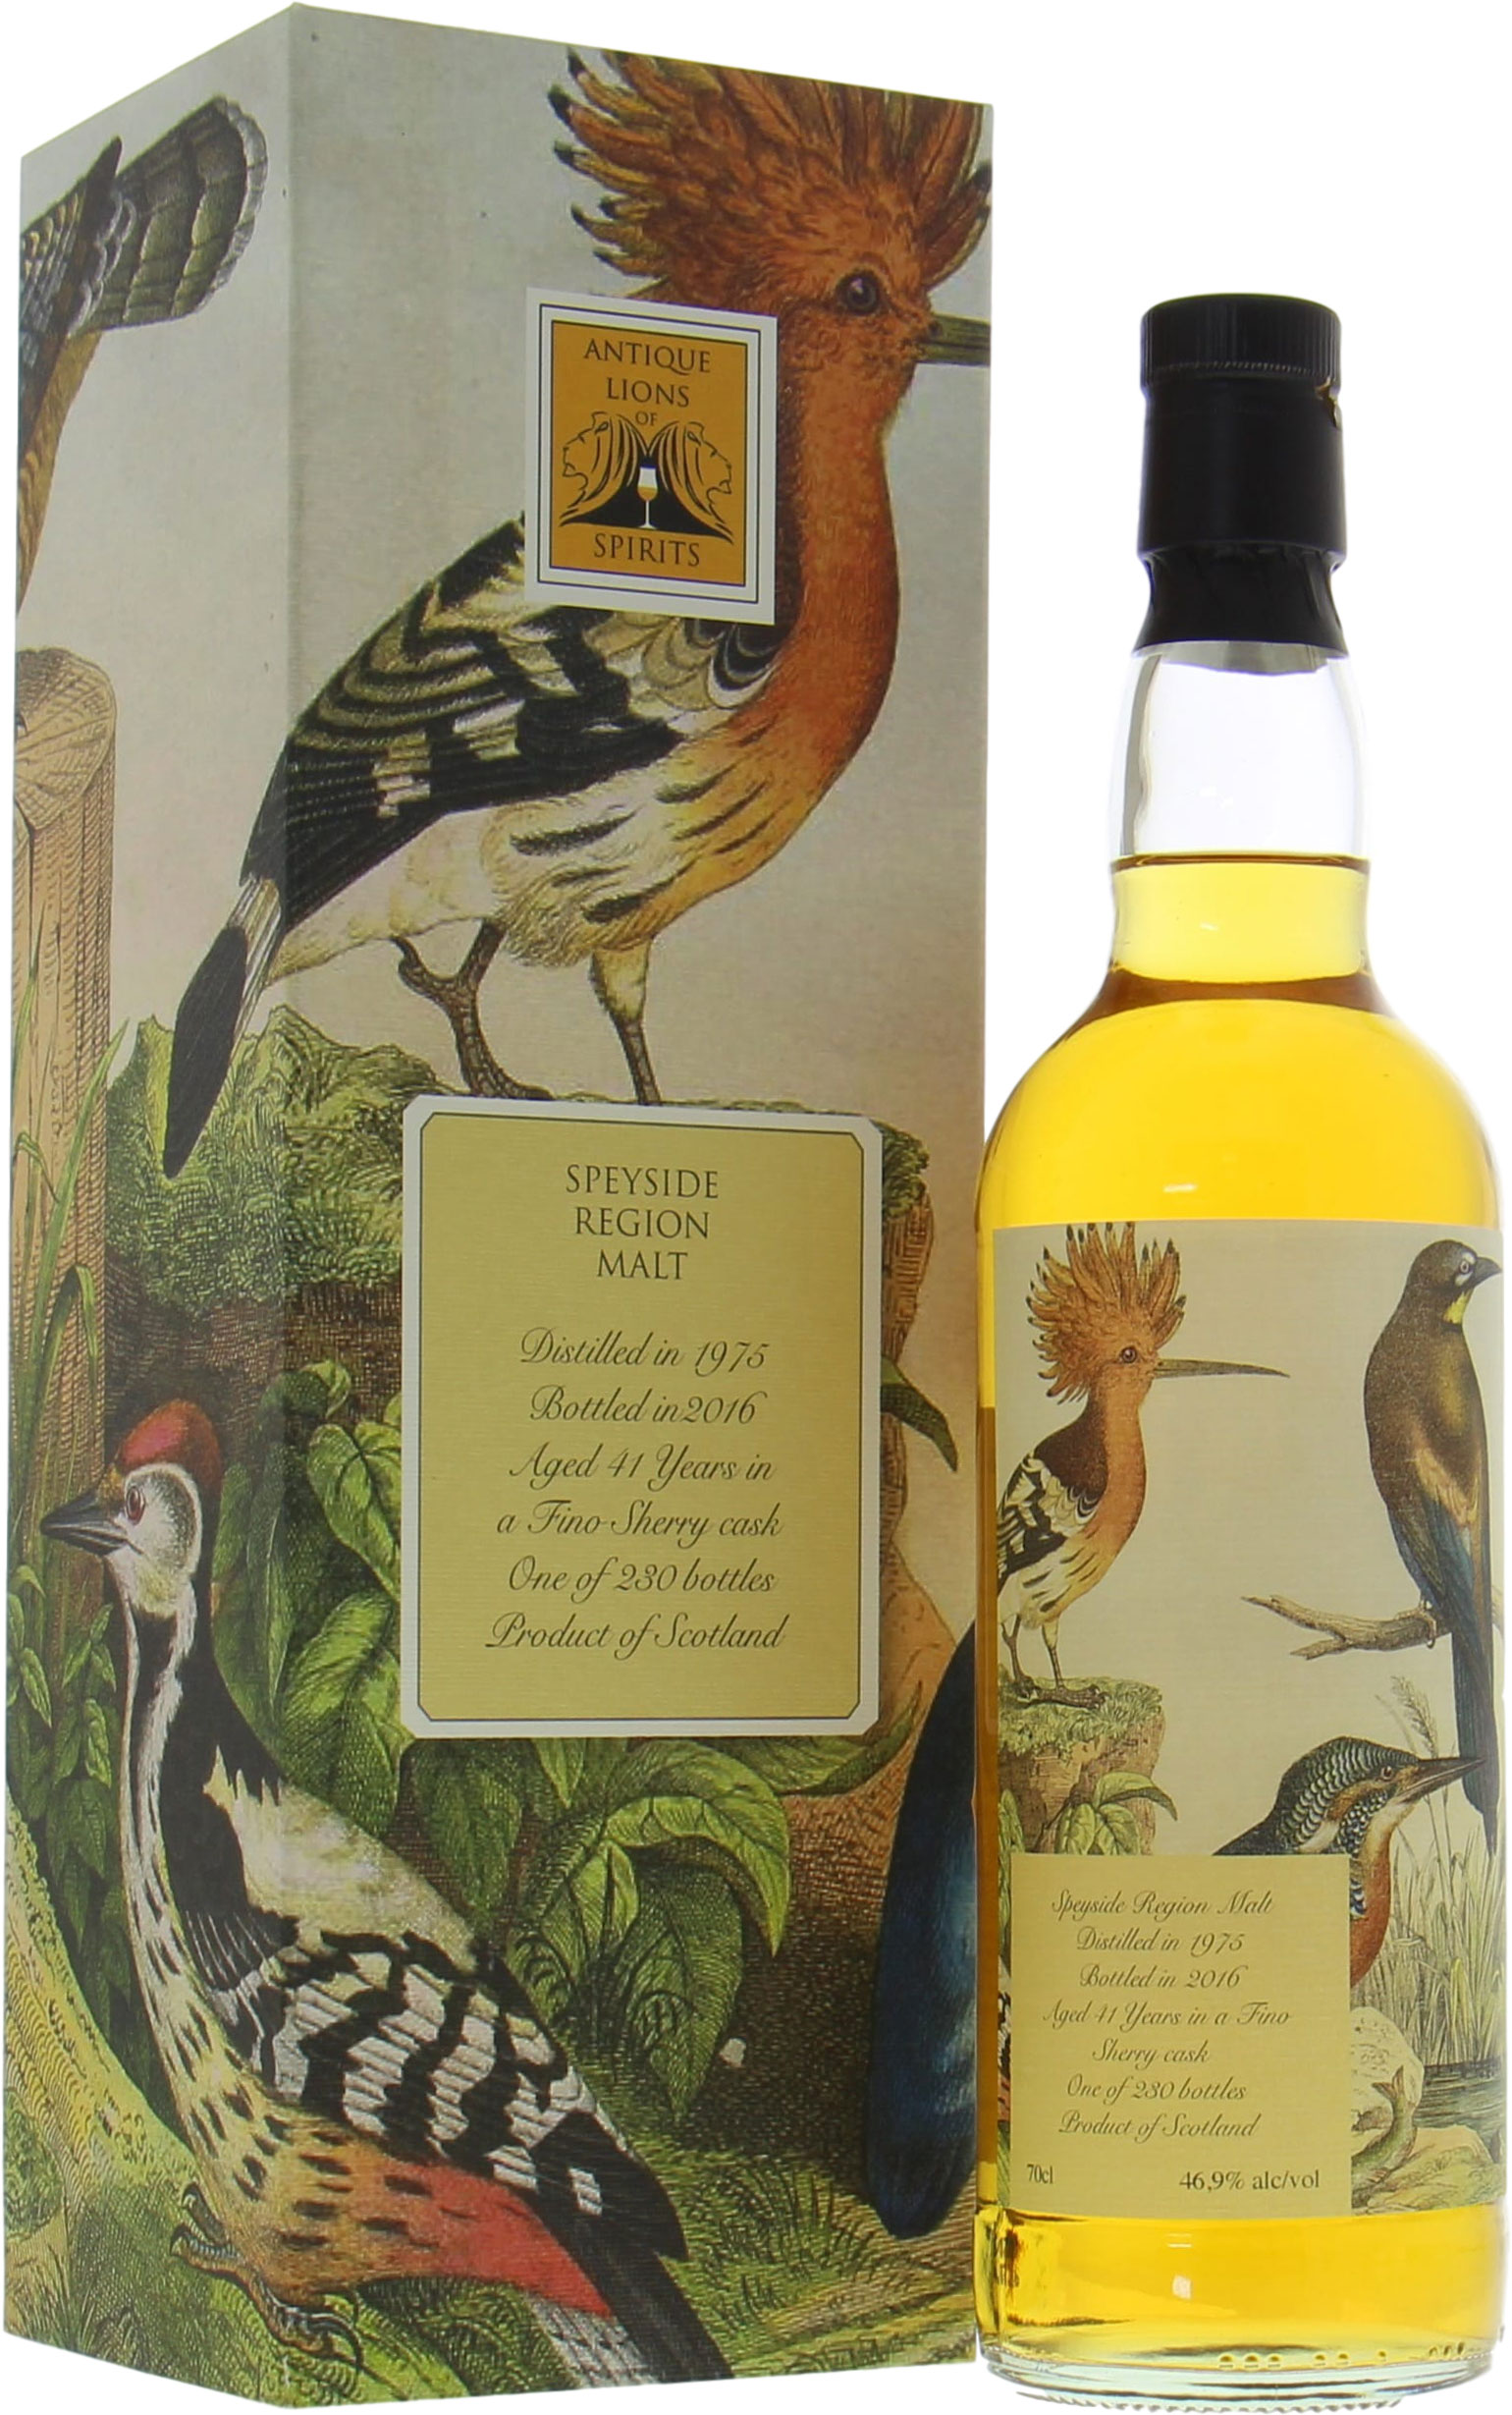 Speyside Region - 41 Years Old Antique Lions of Spirits The Birds 46.9% 1975 In Original Container